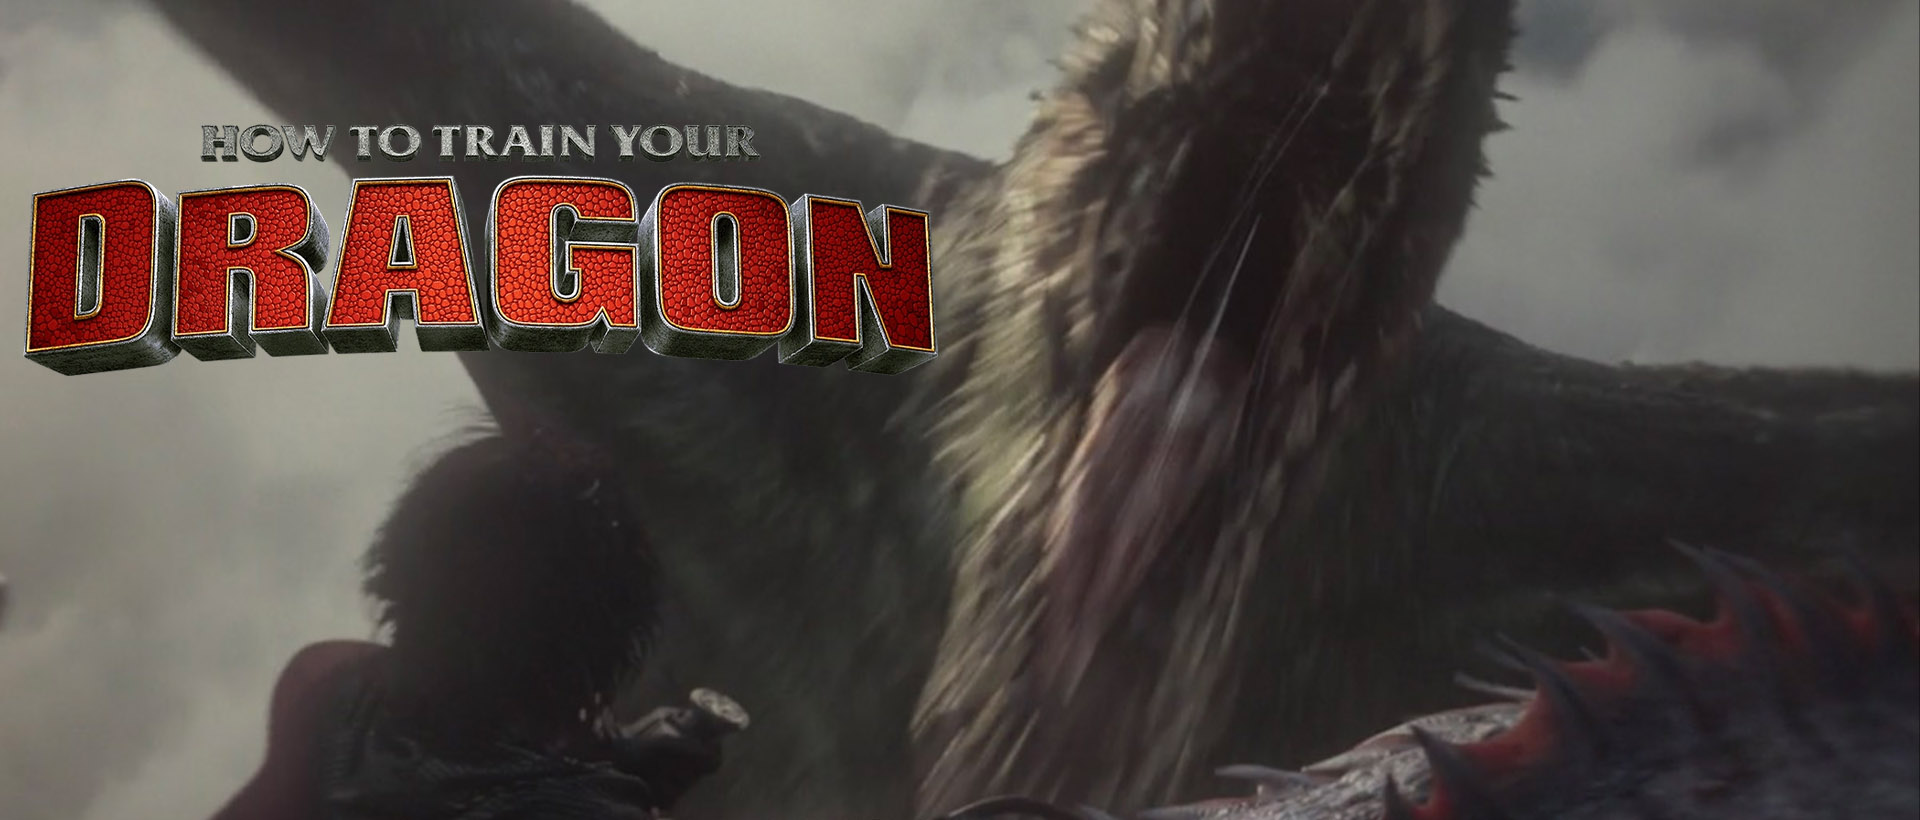 how to train your dragon live action banner2